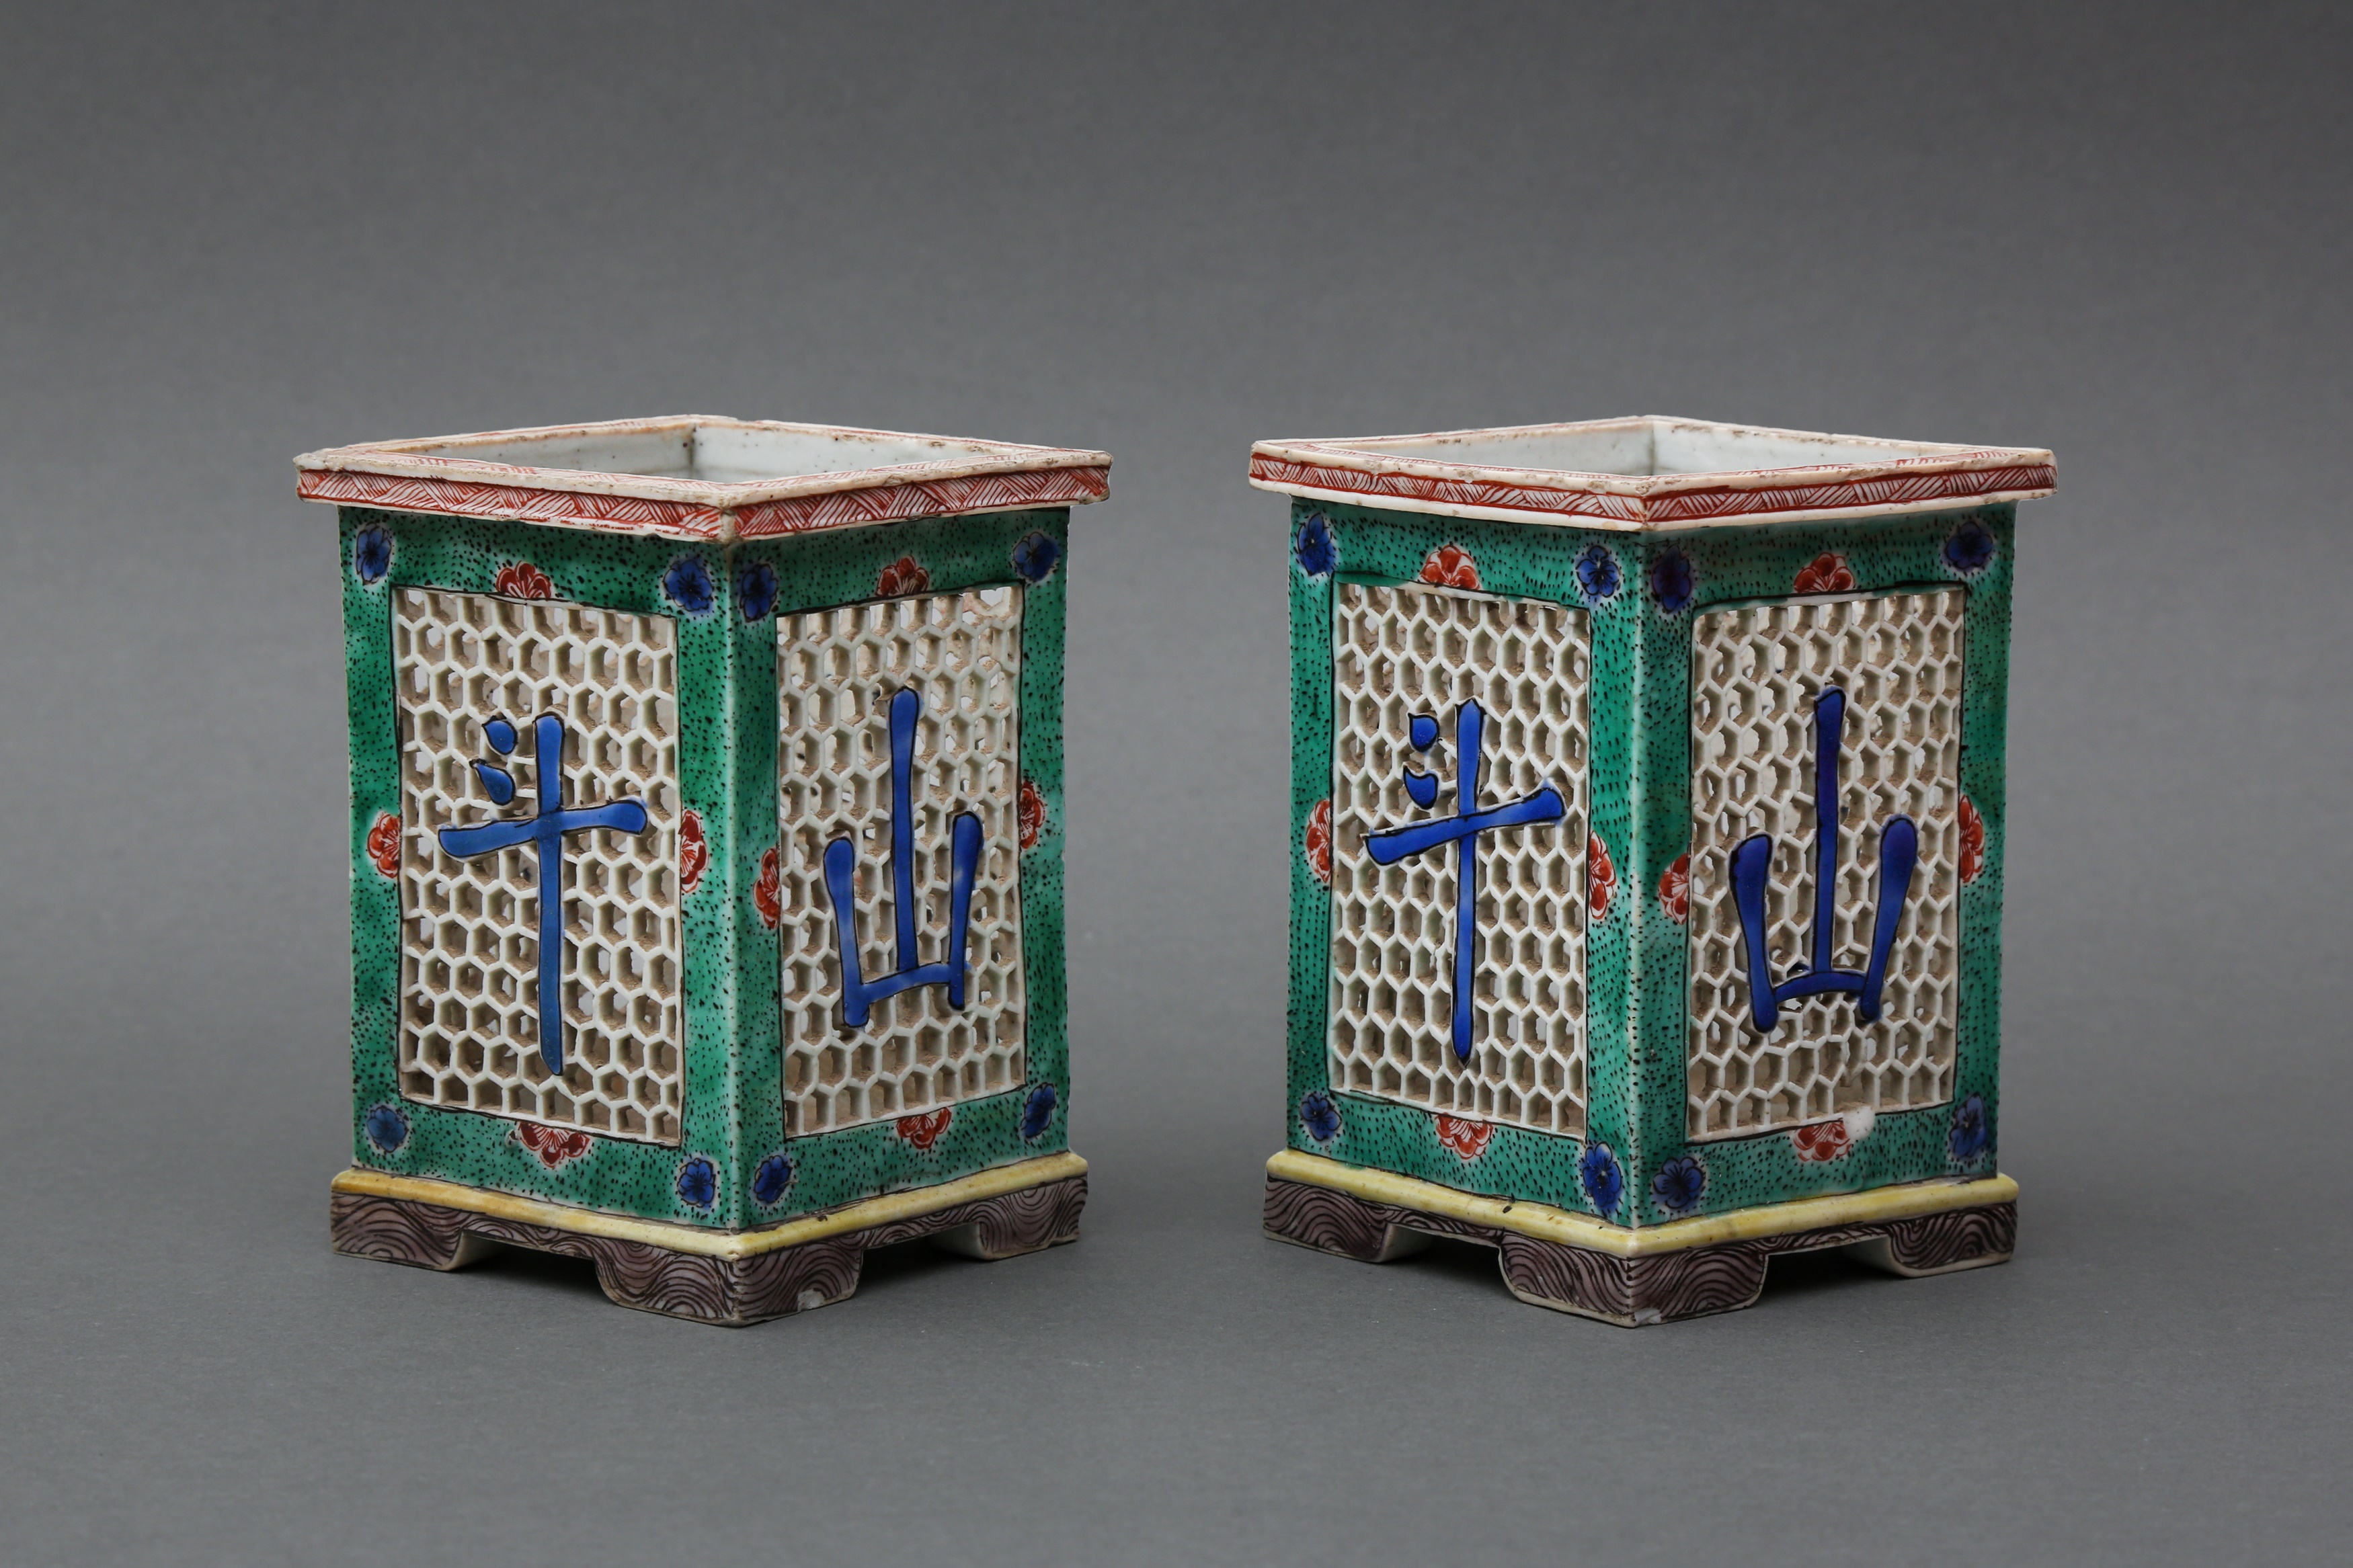 A PAIR OF RARE CHINESE FAMILLE-VERTE BISCUIT OPENWORK BRUSHPOTS, BITONG 清康熙 蘇三彩文章三斗方筆筒一對 - Image 2 of 21